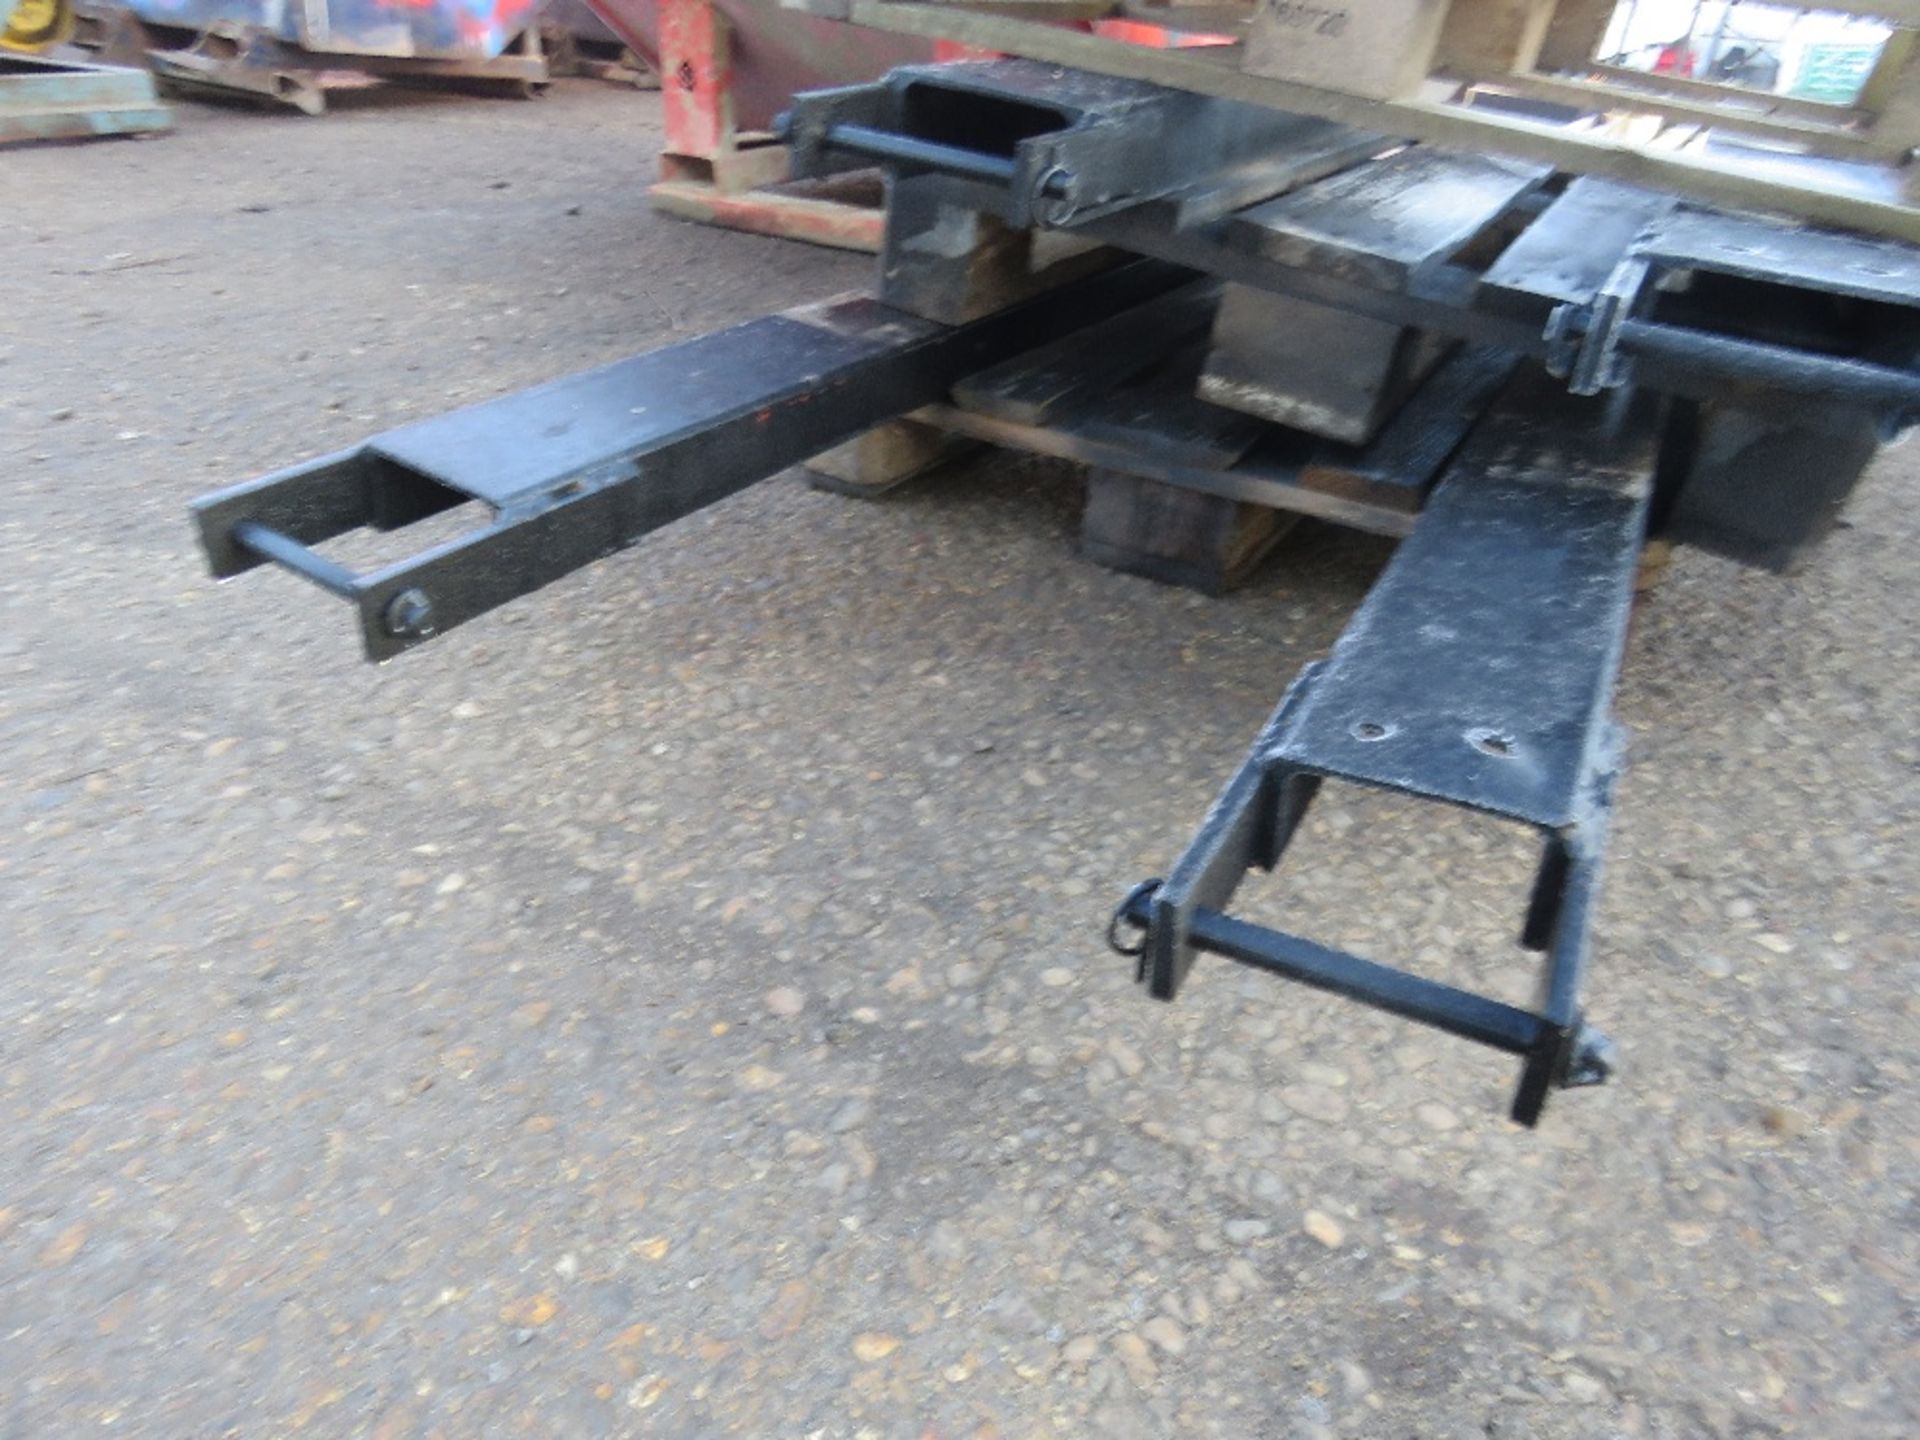 FORKLIFT EXTENSION TINES/SLEEVES WITH LOCKING PINS. 2.5M LENGTH APPROX - Image 2 of 2